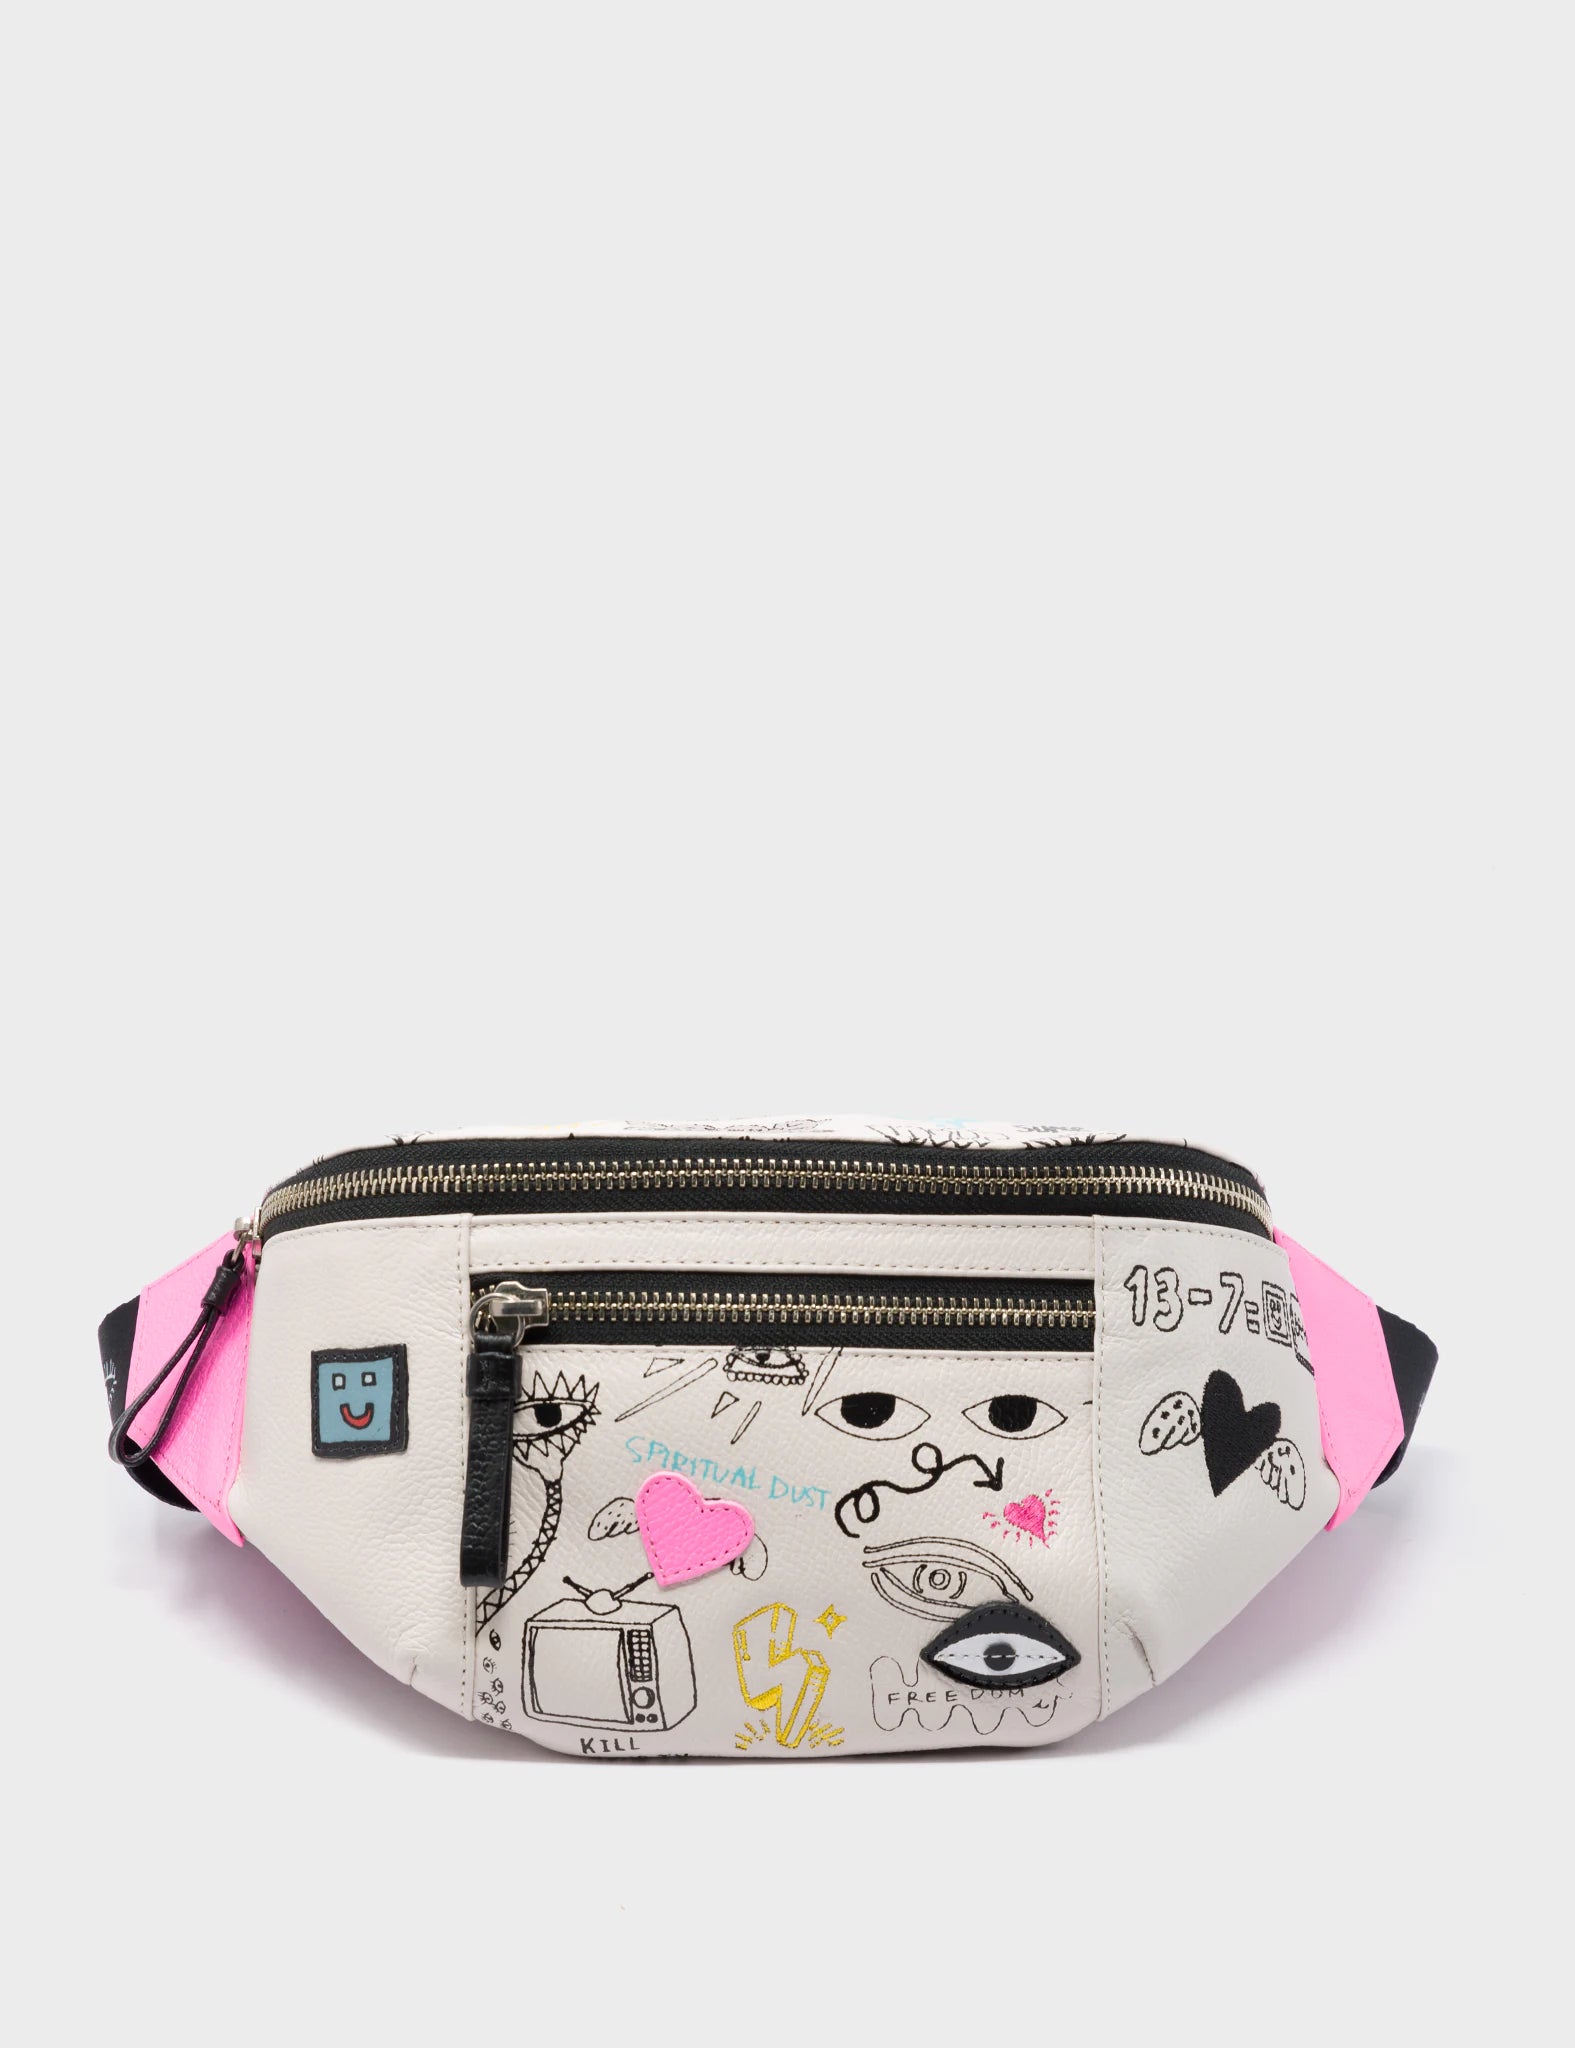 Harold Fanny Pack Cream Leather - Urban Doodles Embroidery - Front View